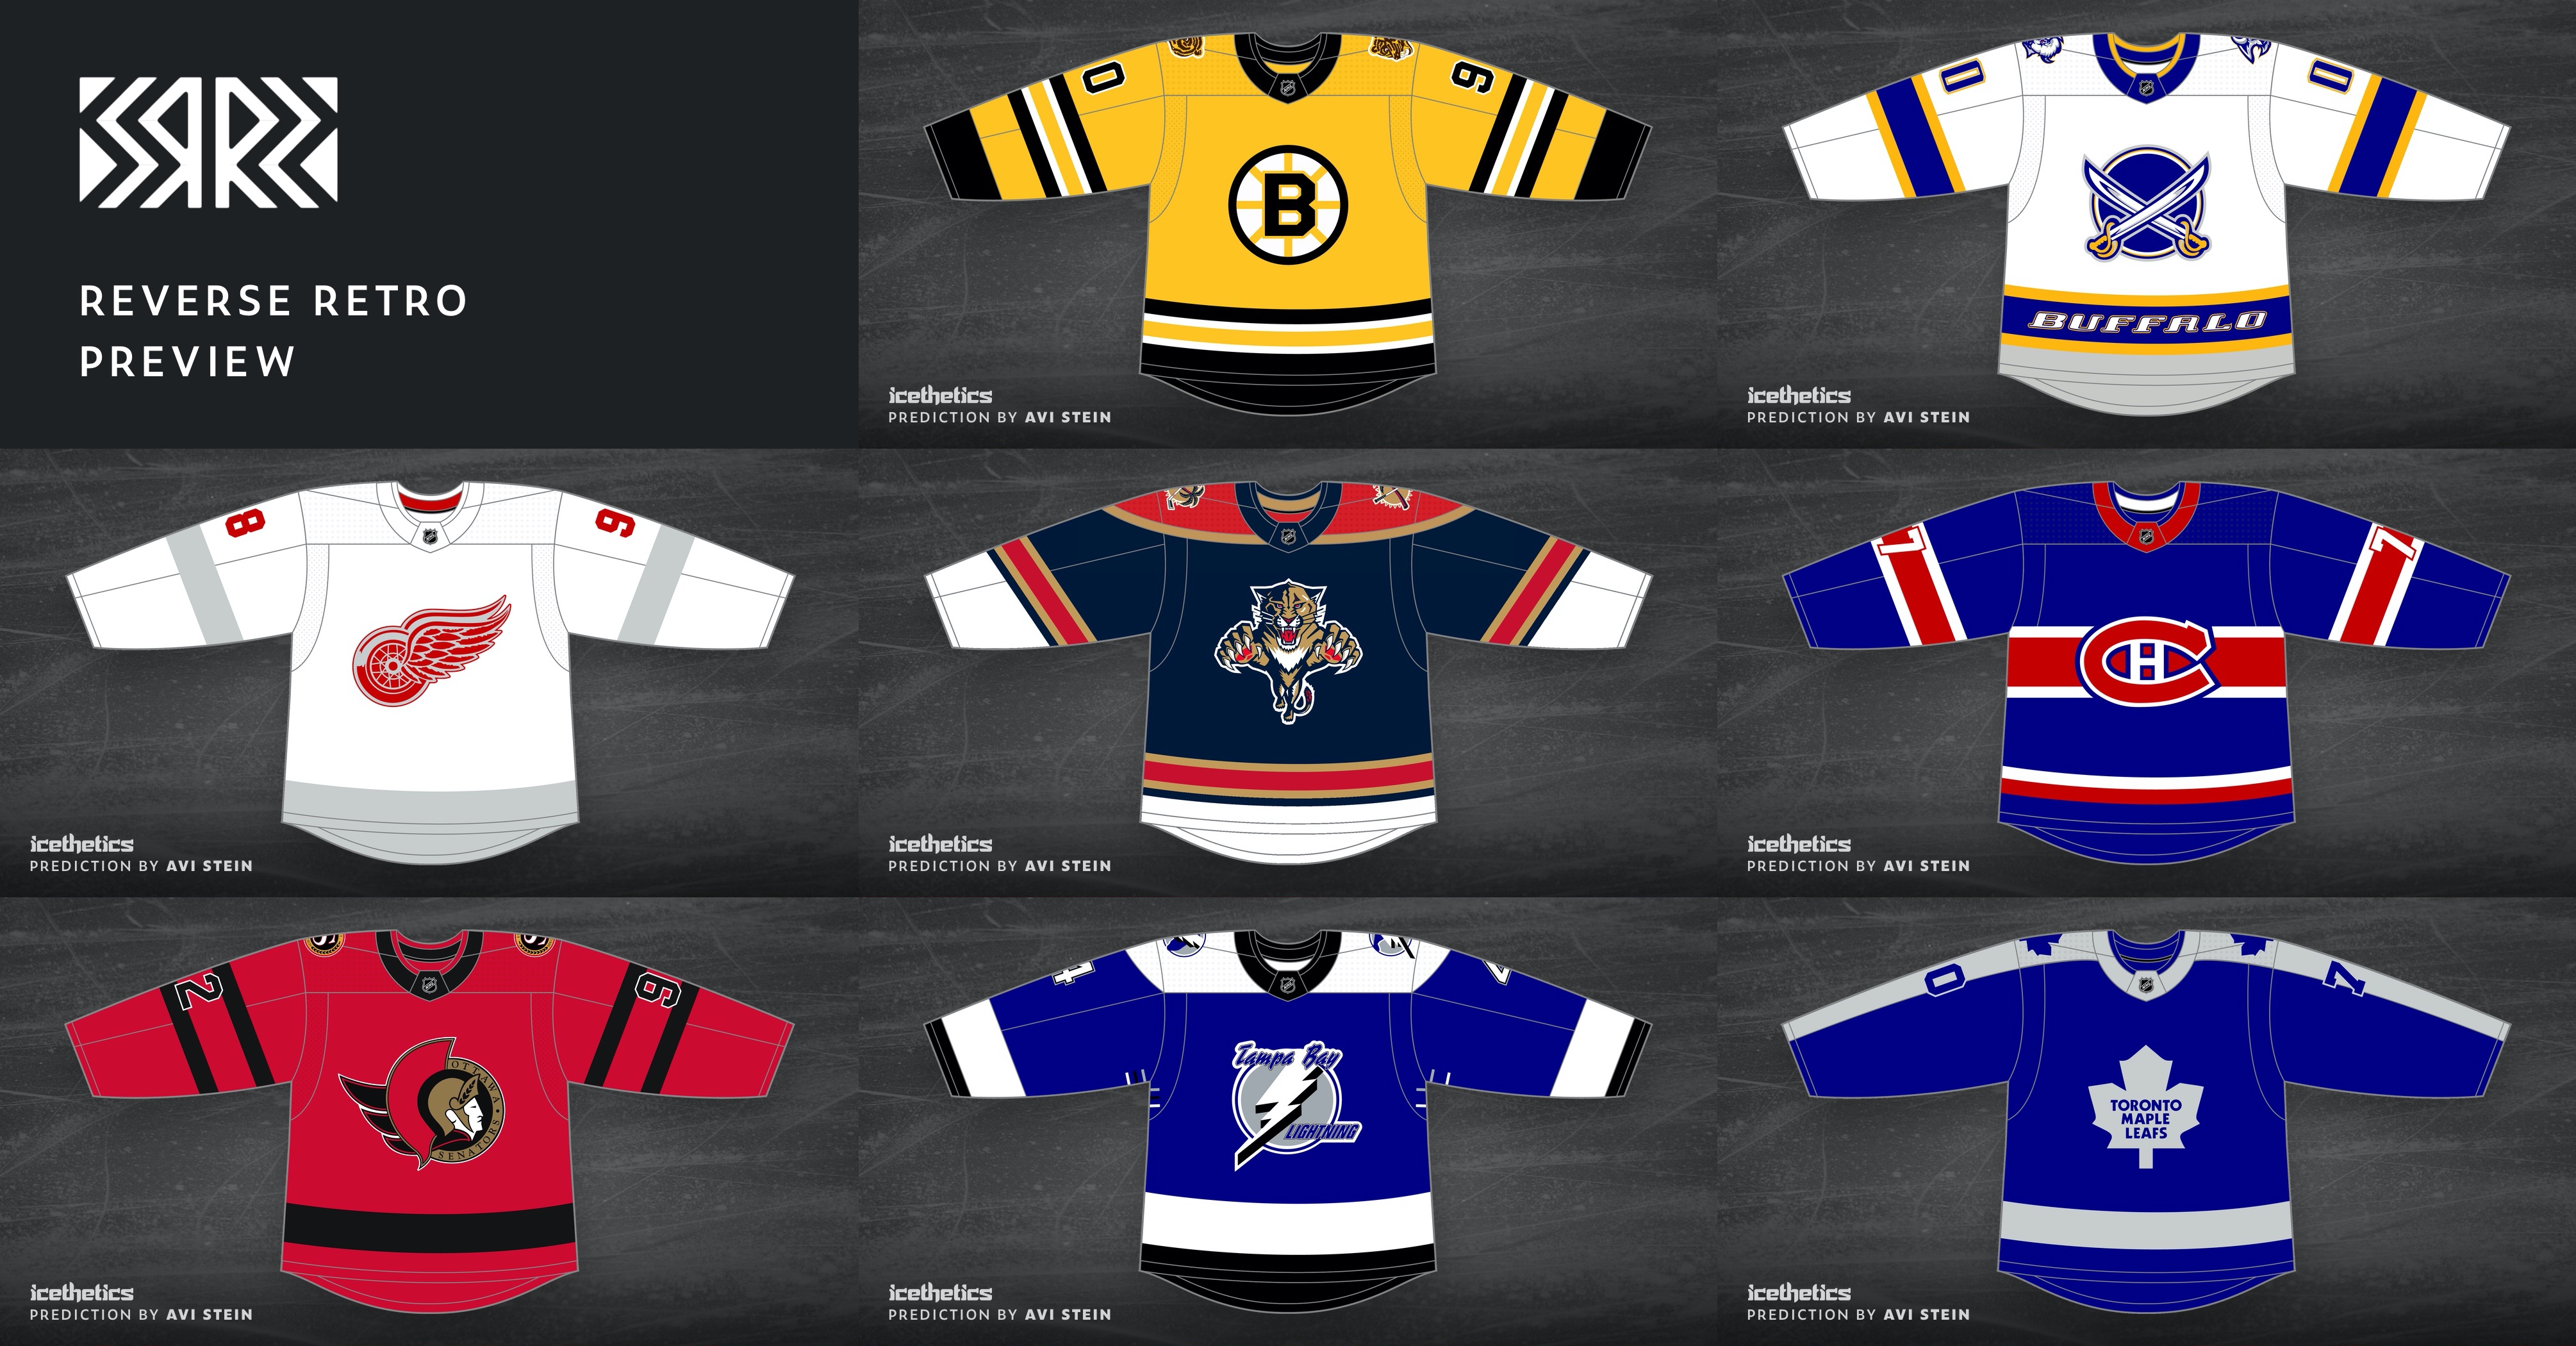 icethetics on X: The new #ReverseRetro #NHL jersey reveals are